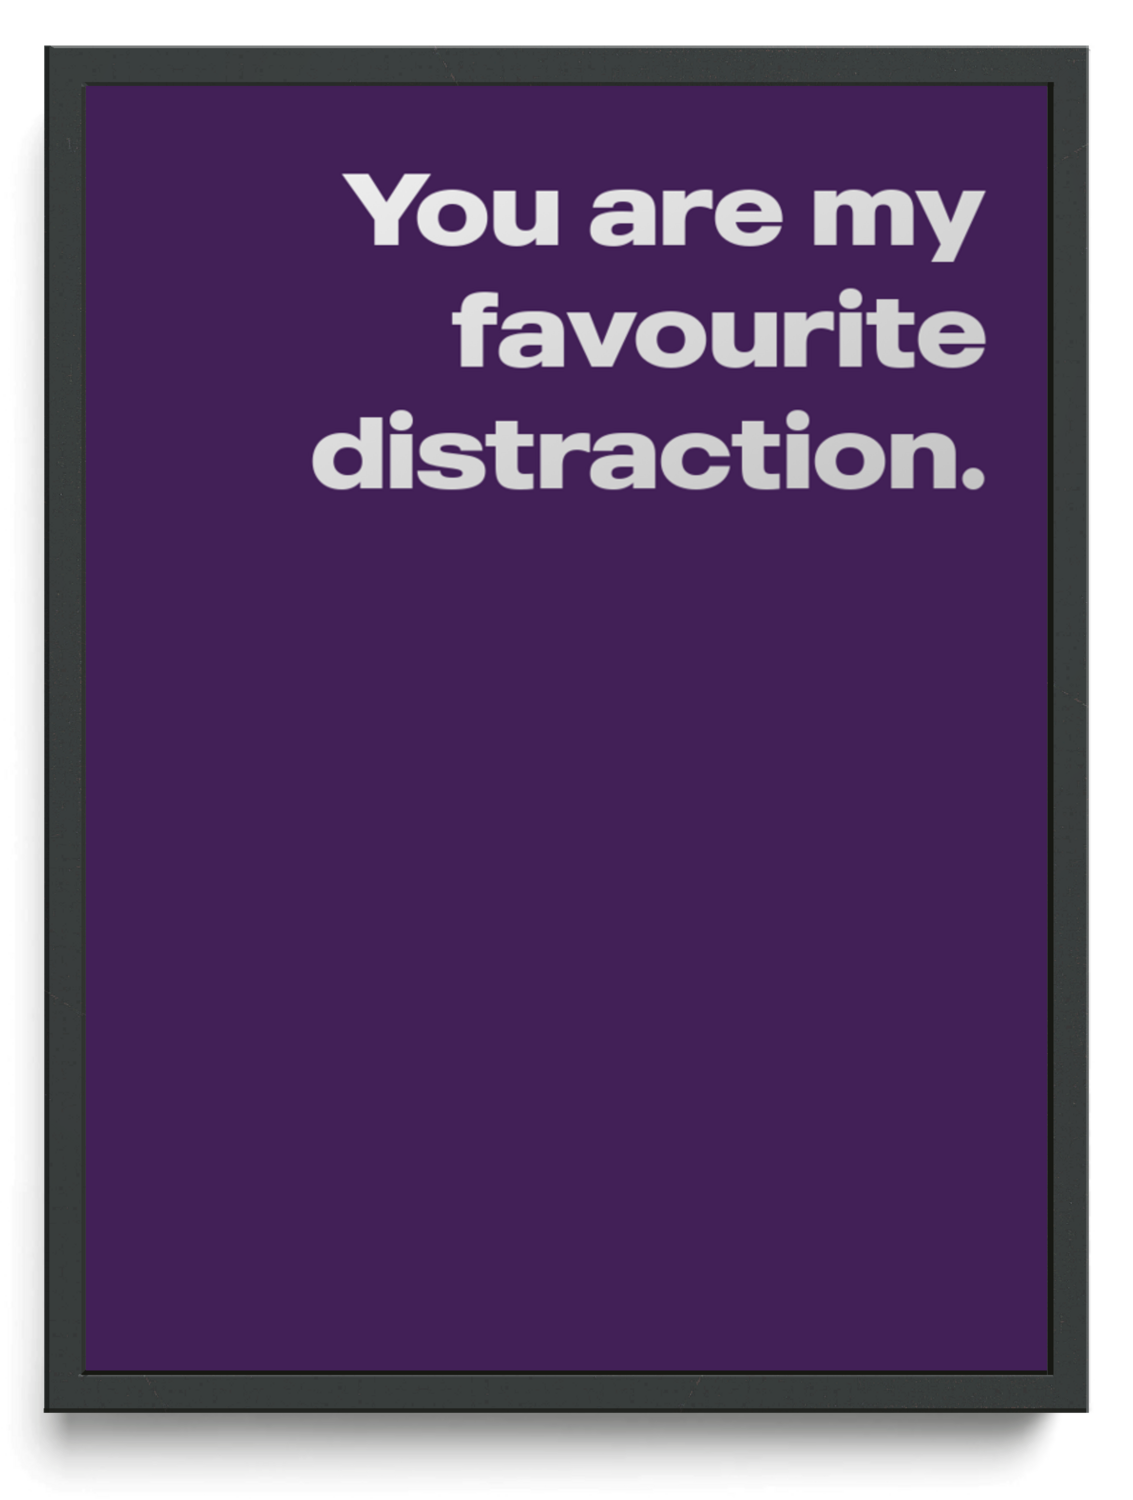 You are my favourite distraction framed typographic print